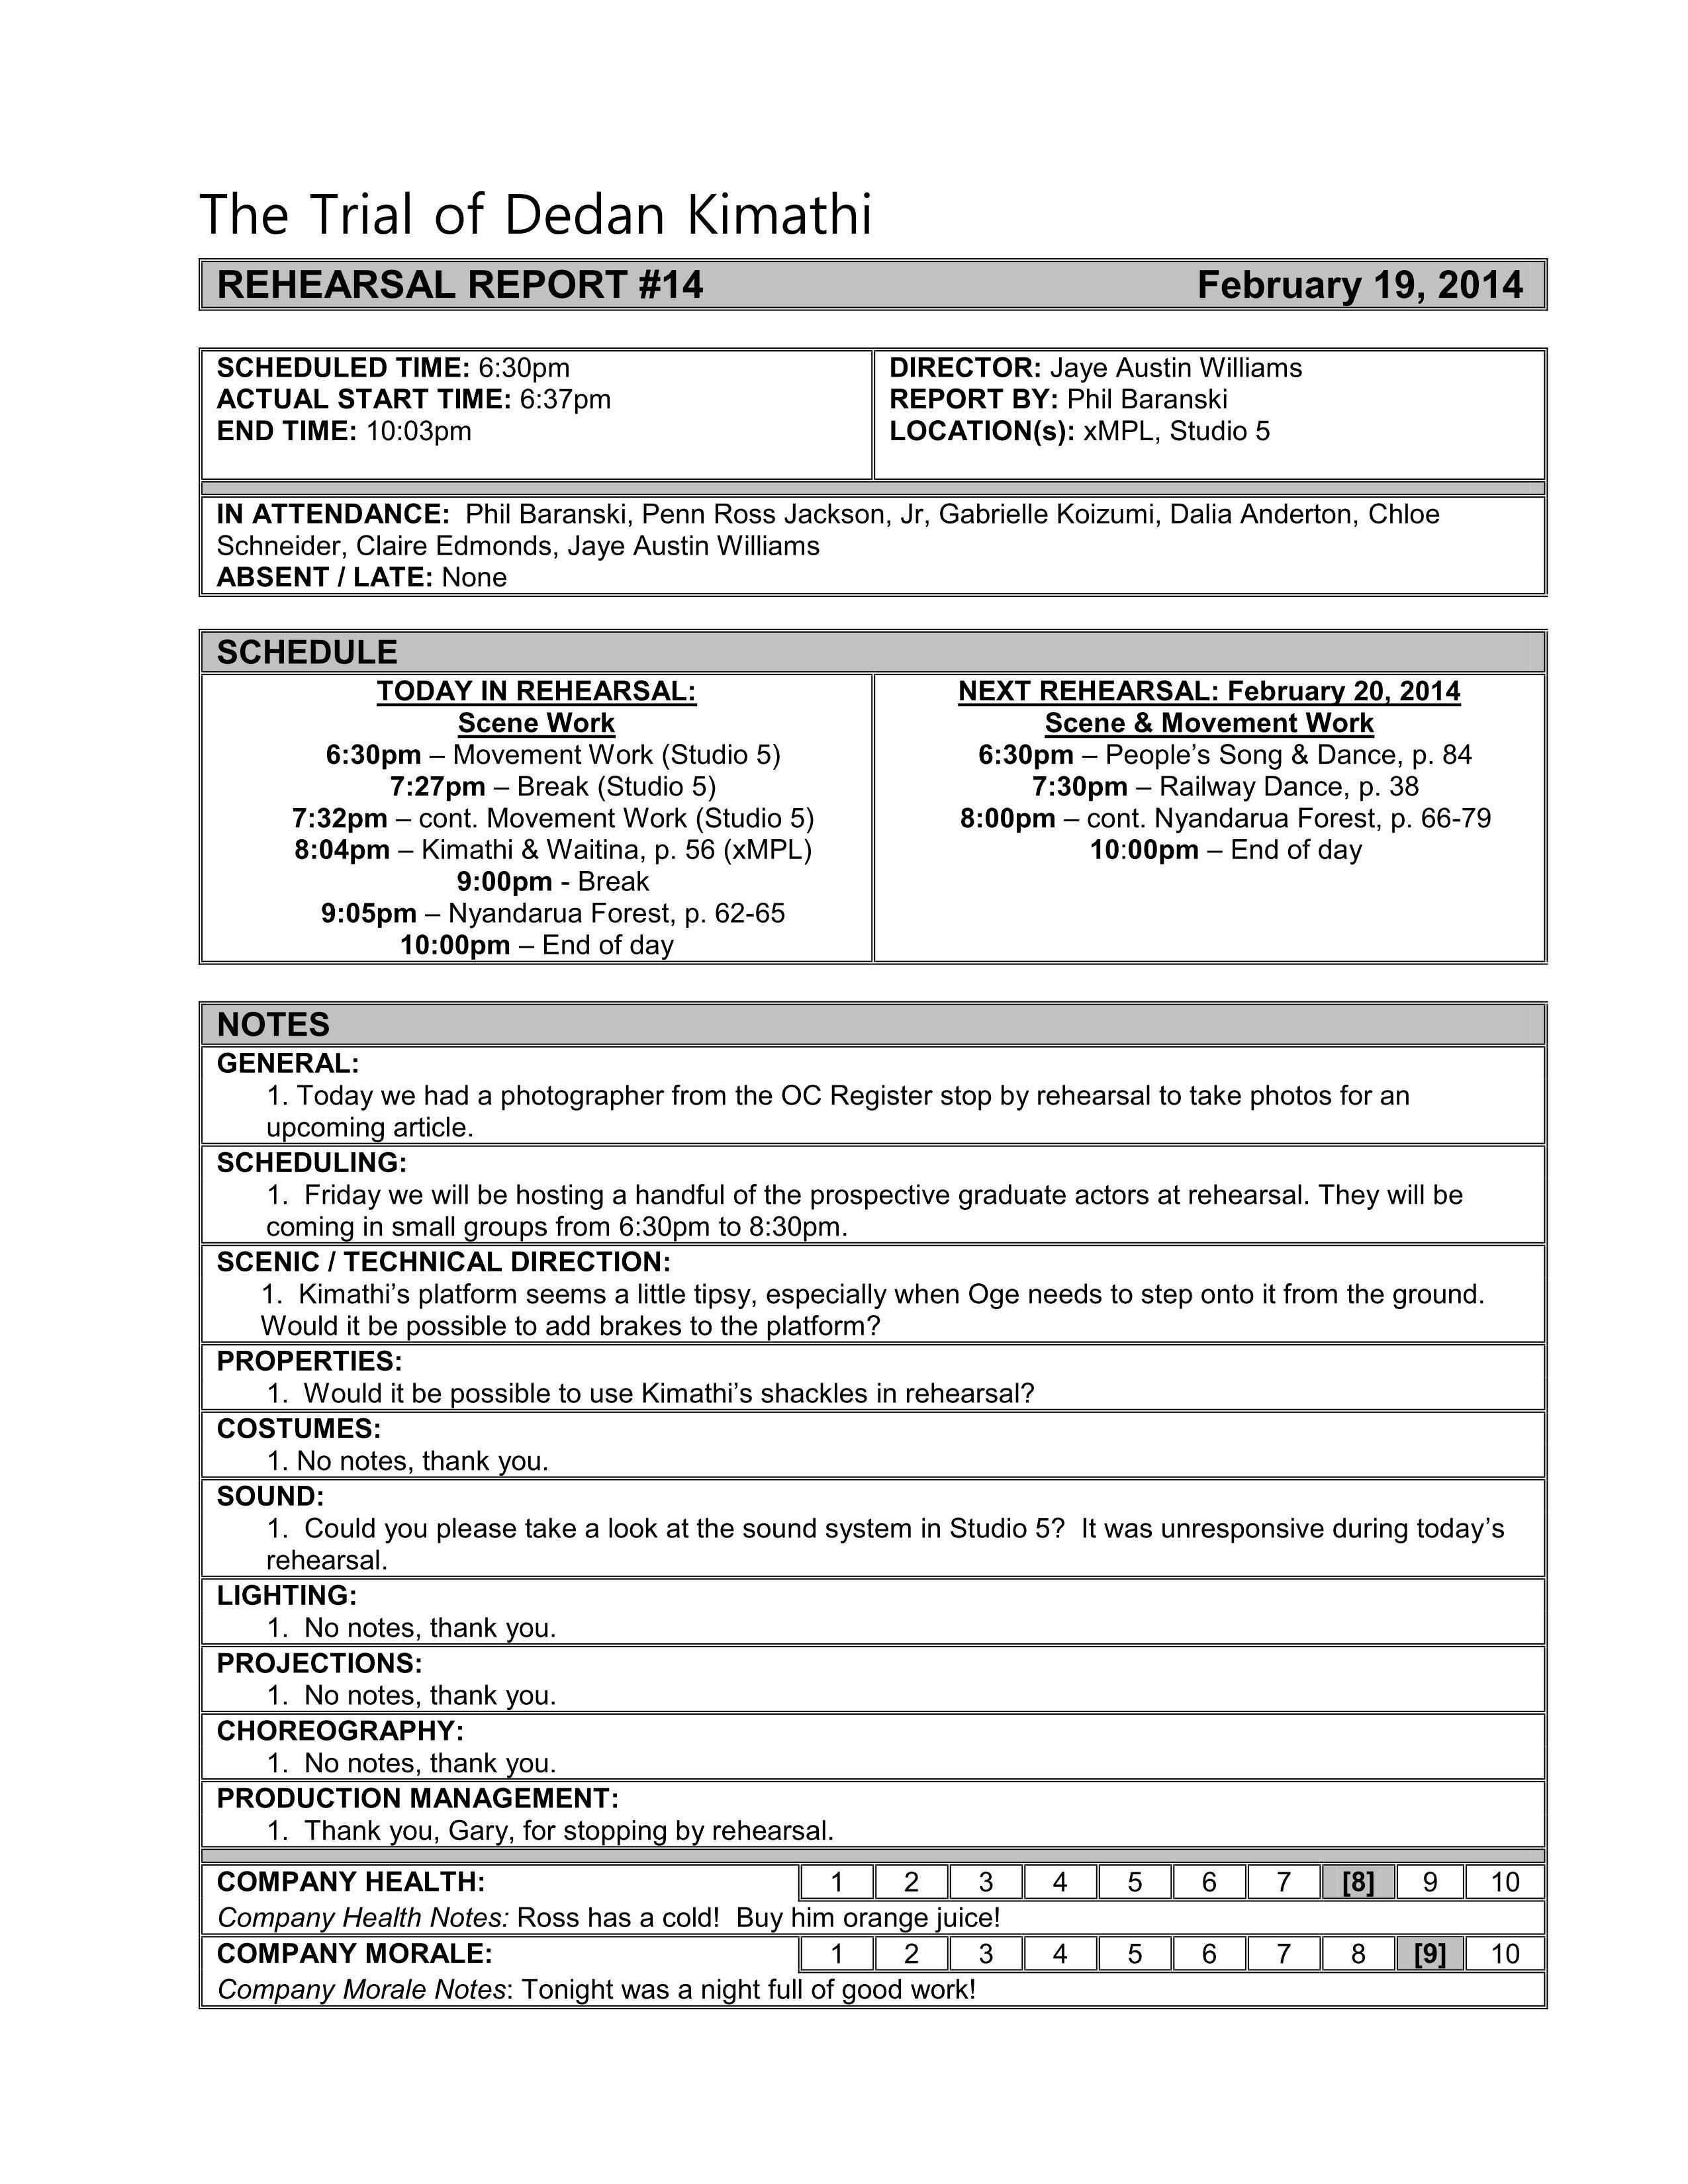 Image Result For Stage Manager Rehearsal Report | Drama Intended For Rehearsal Report Template